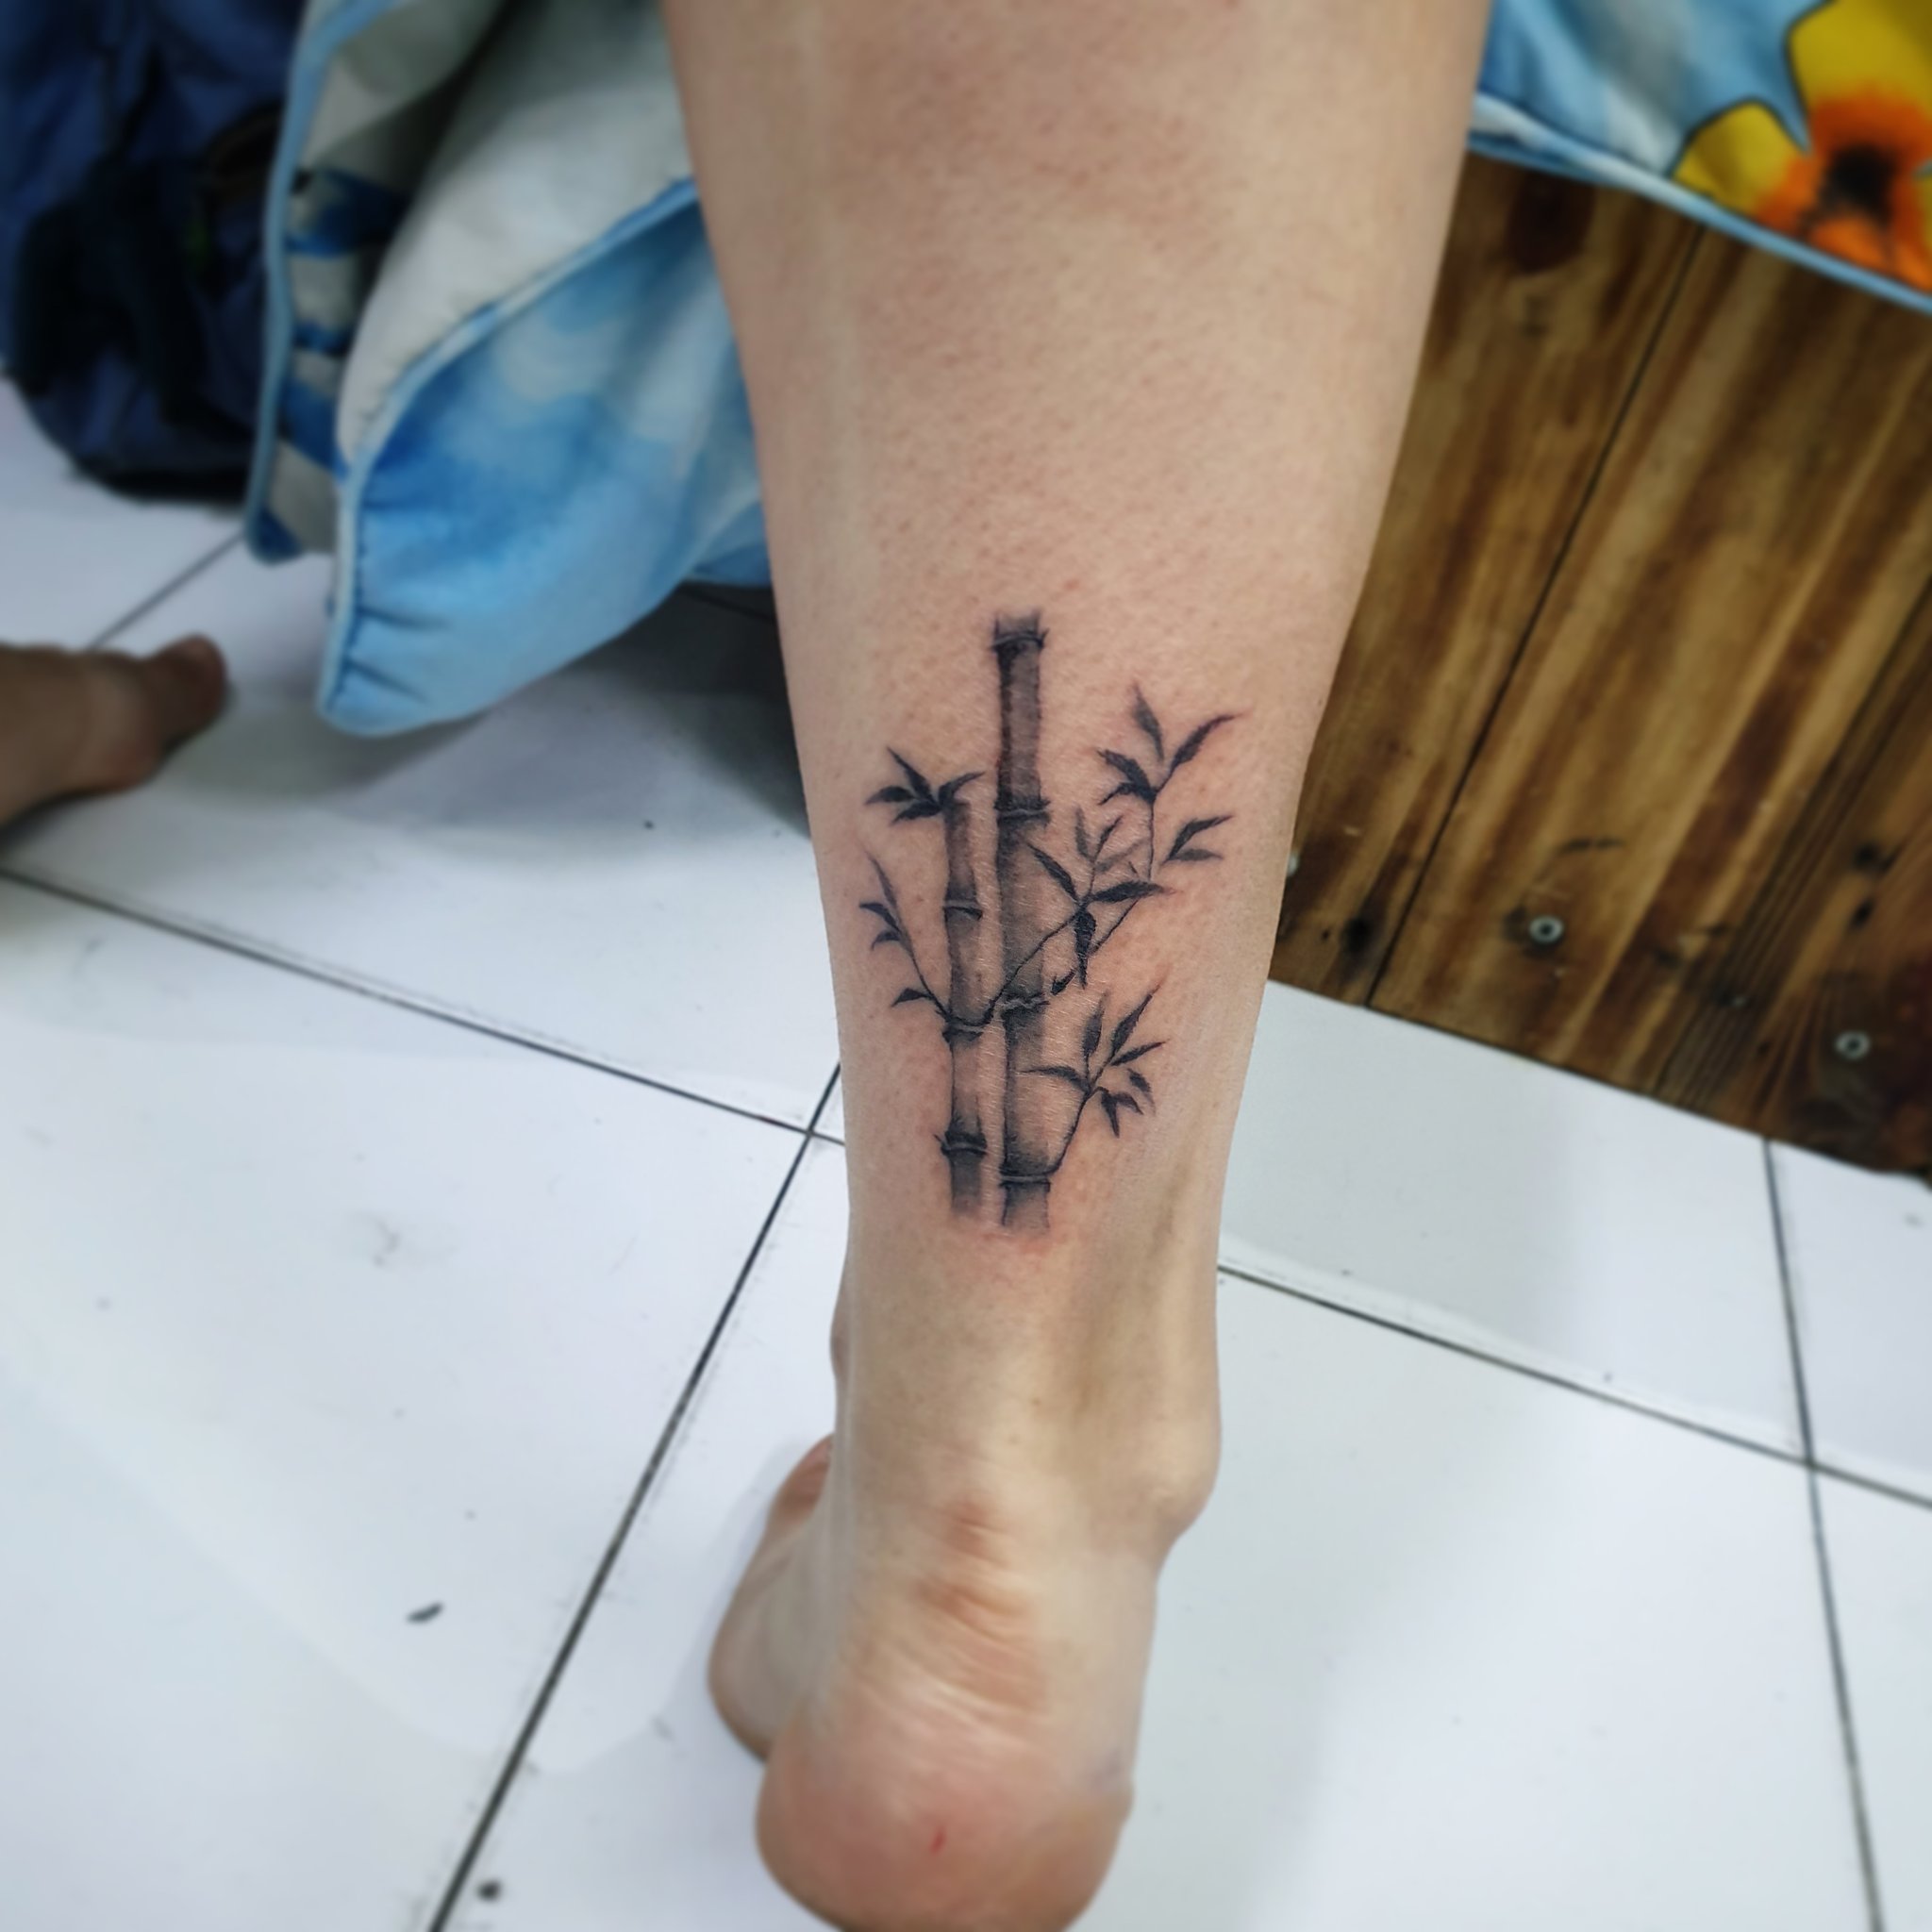 Getting A Bamboo Tattoo in Thailand | Advice From An Expert Artist